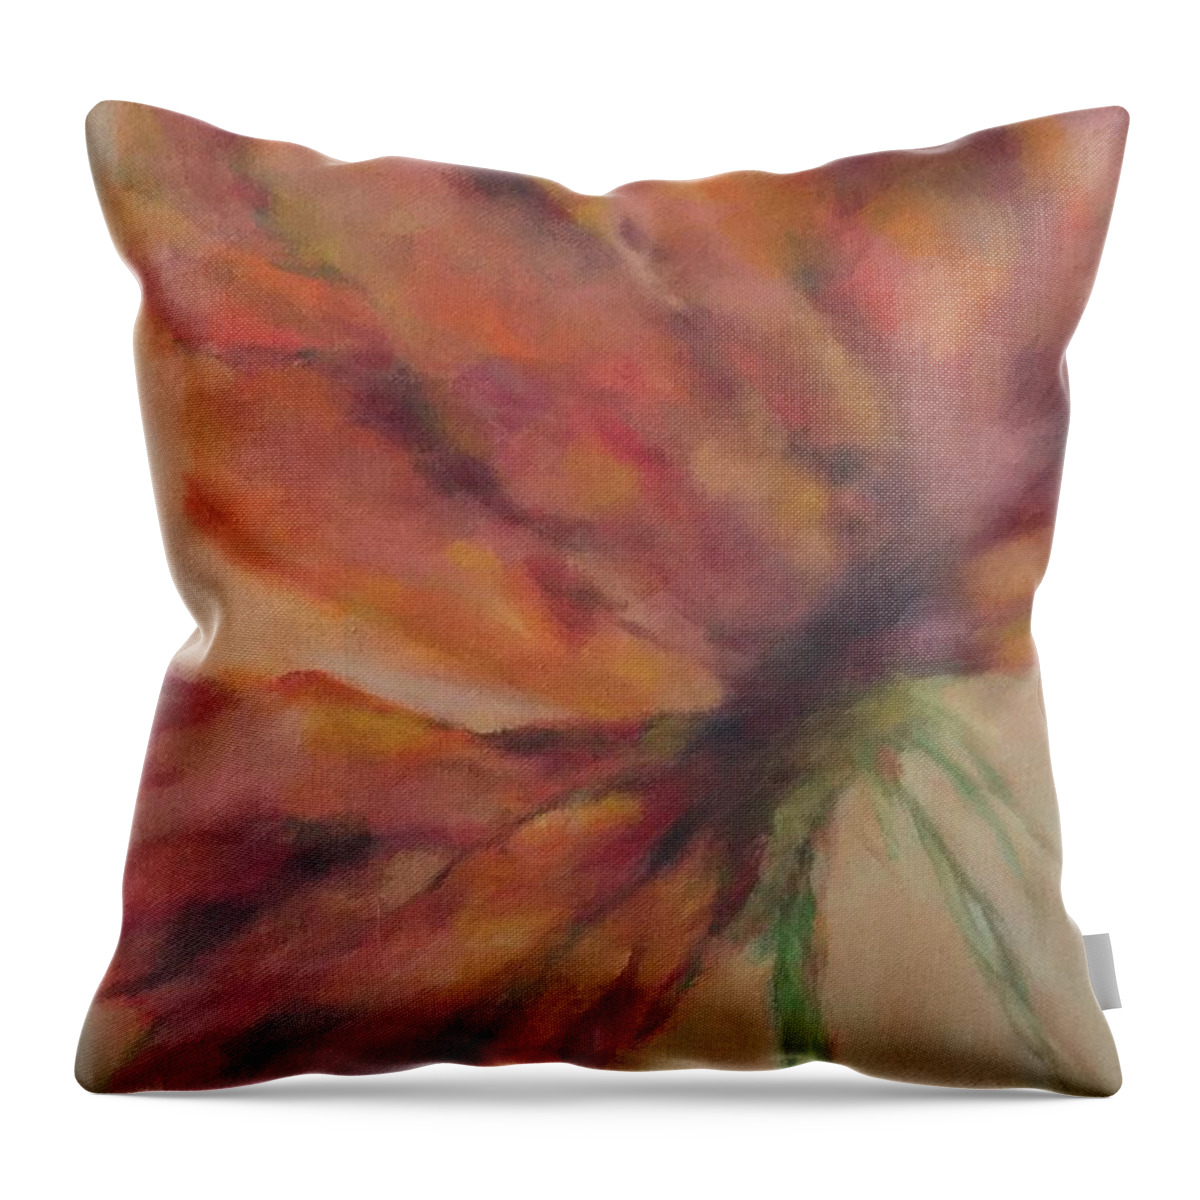 New Beginnings Throw Pillow featuring the painting New Beginnings by Kathy Stiber